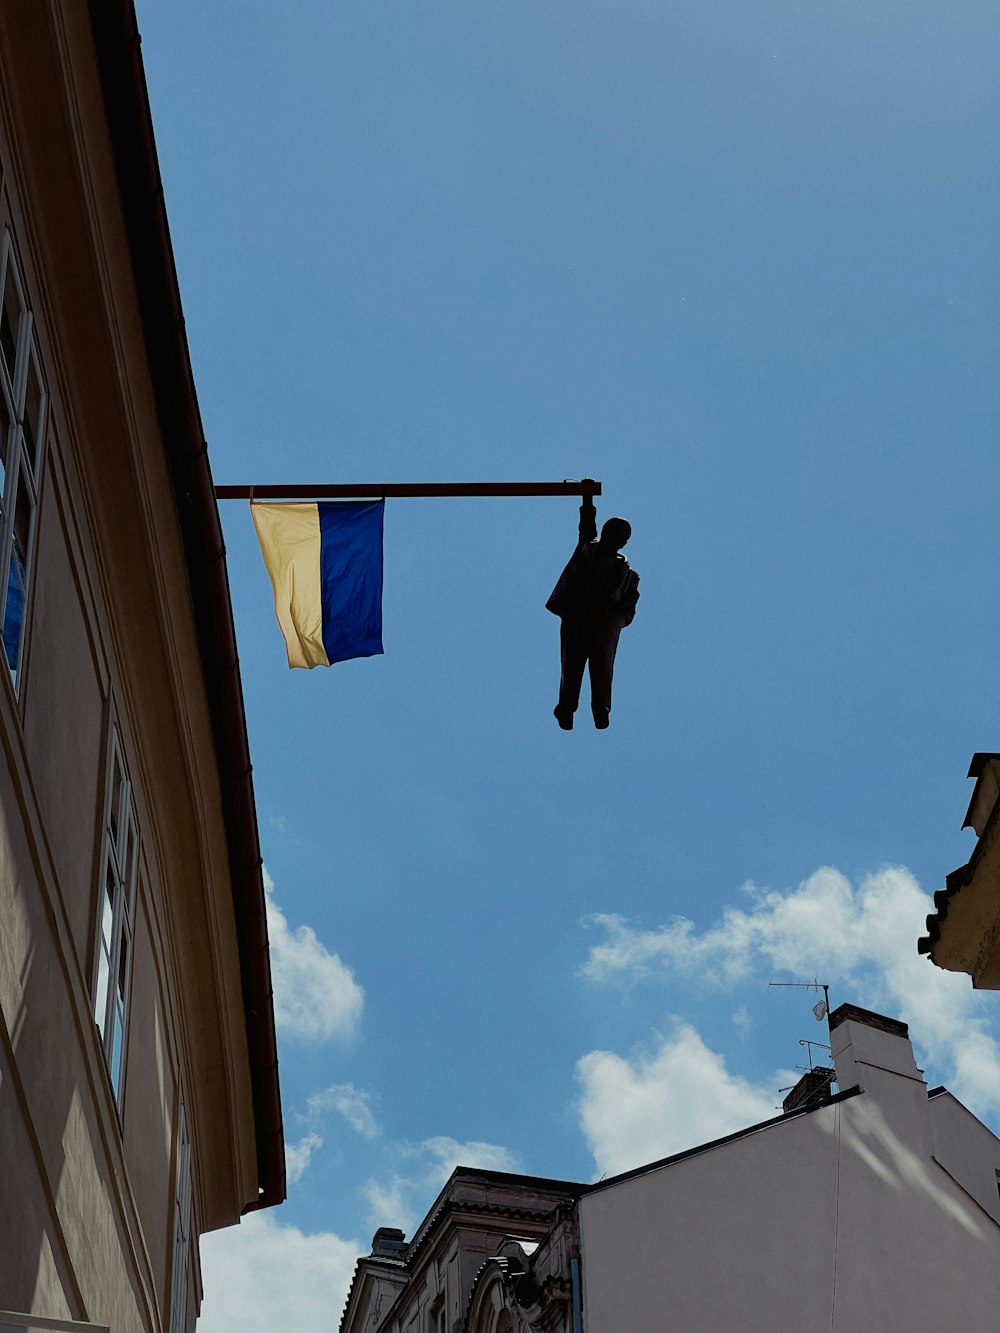 a person hanging from a street light with a building in the background